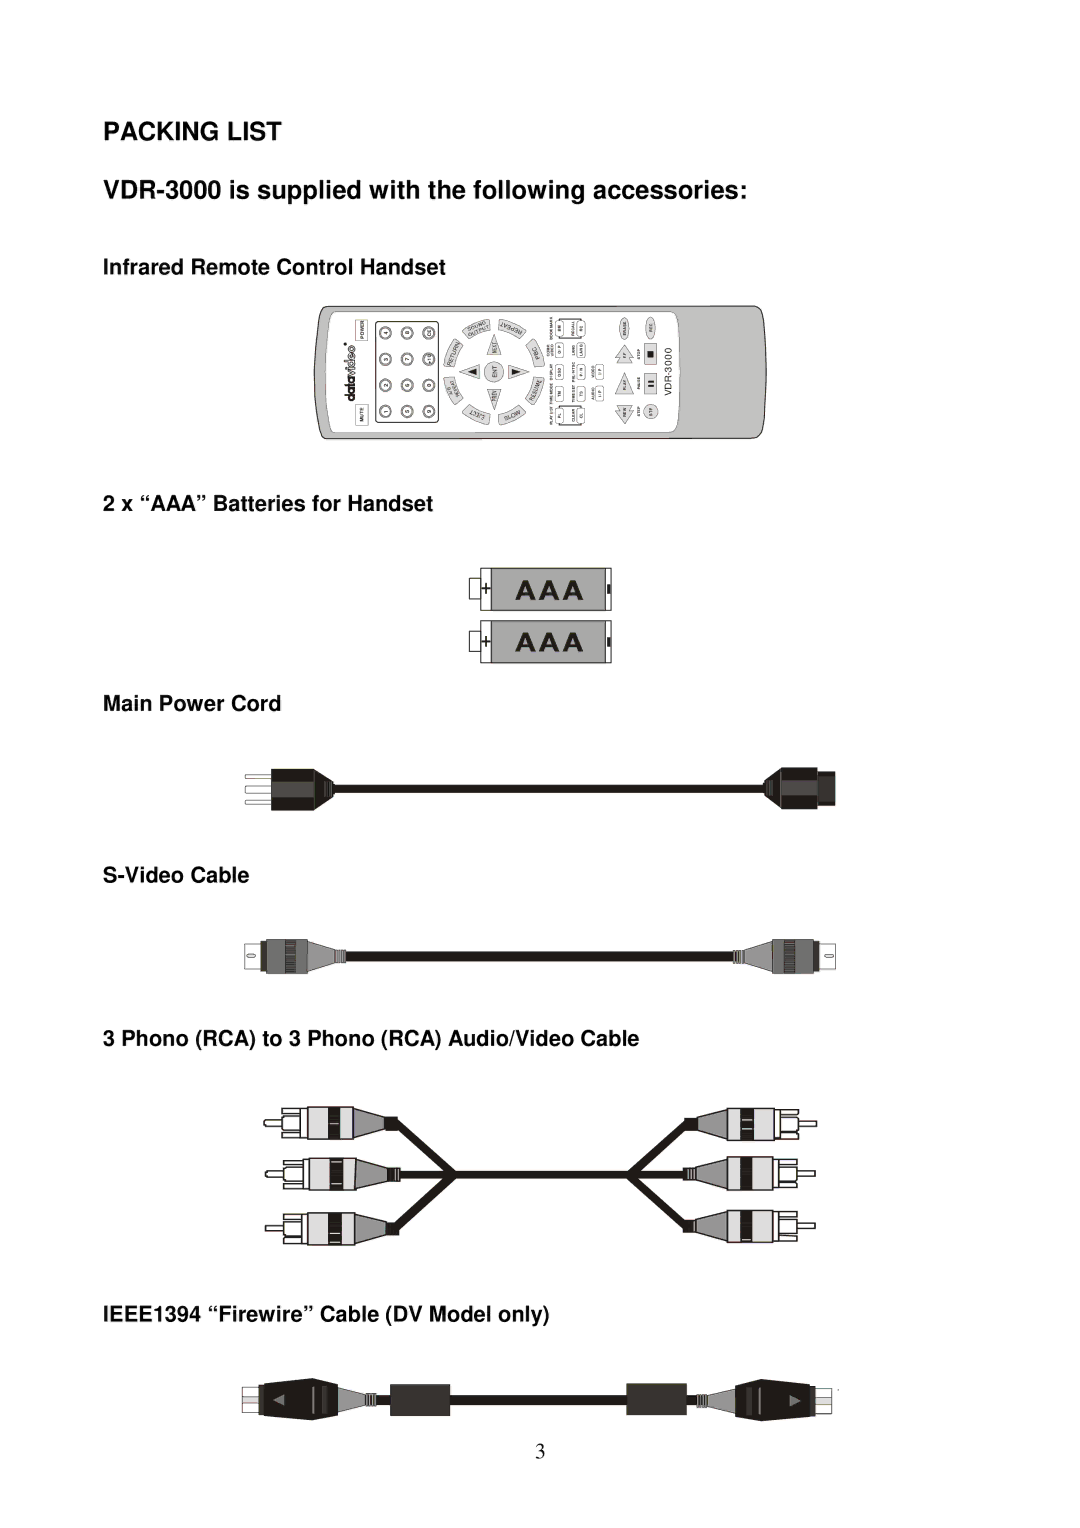 Datavideo instruction manual VDR-3000 is supplied with the following accessories, Infrared Remote Control Handset 